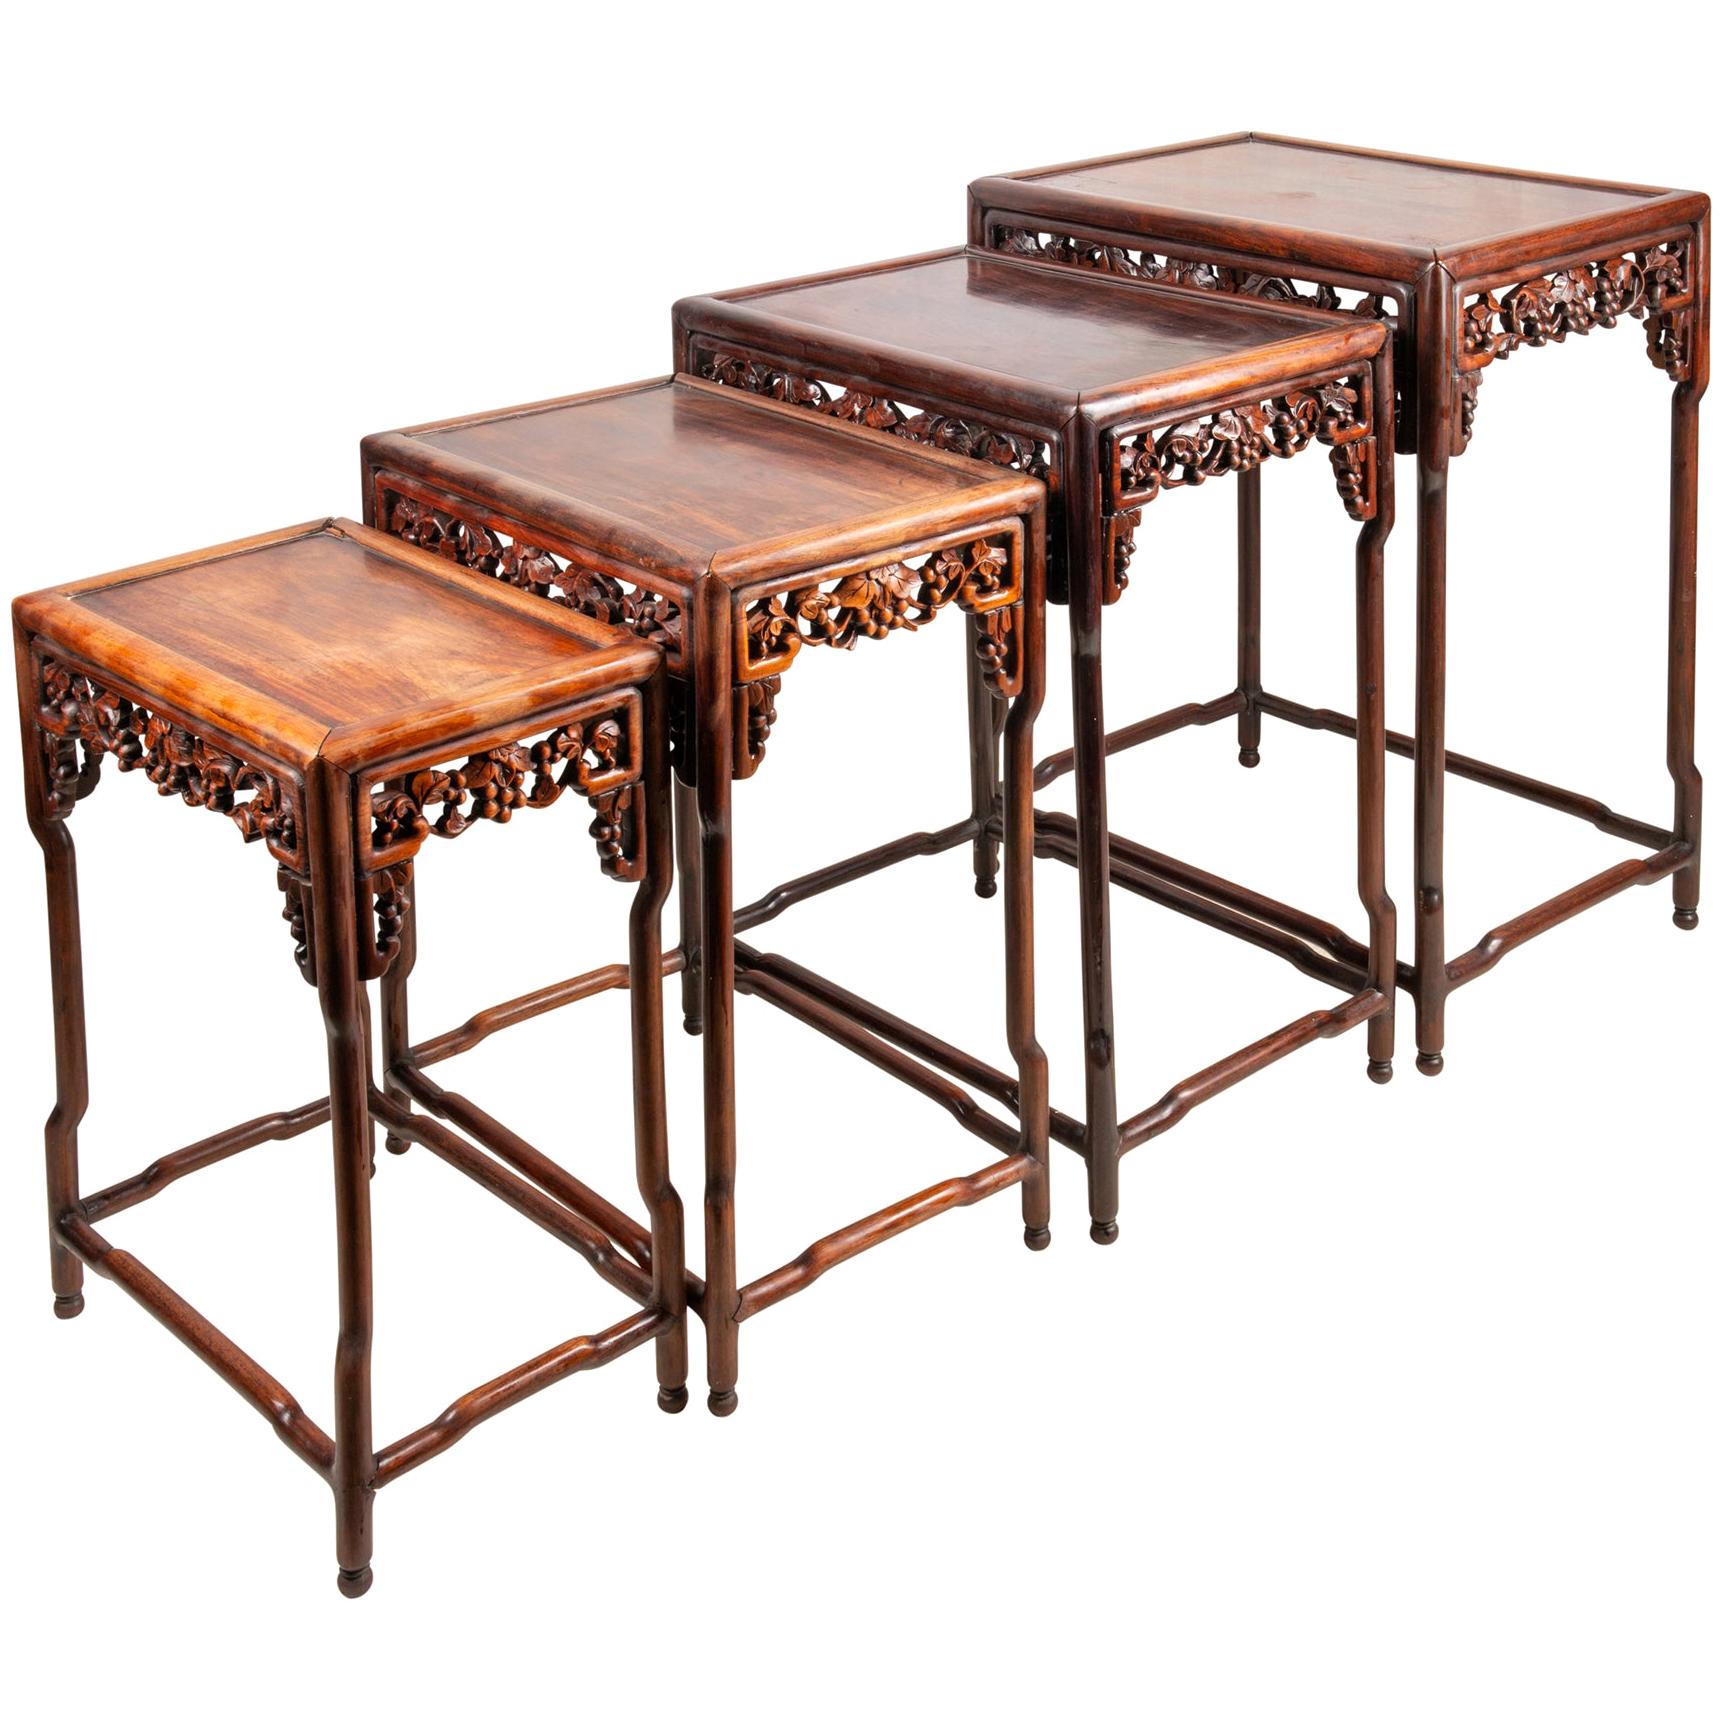 Nest of Four Chinese Hardwood Tables, circa 1880 For Sale